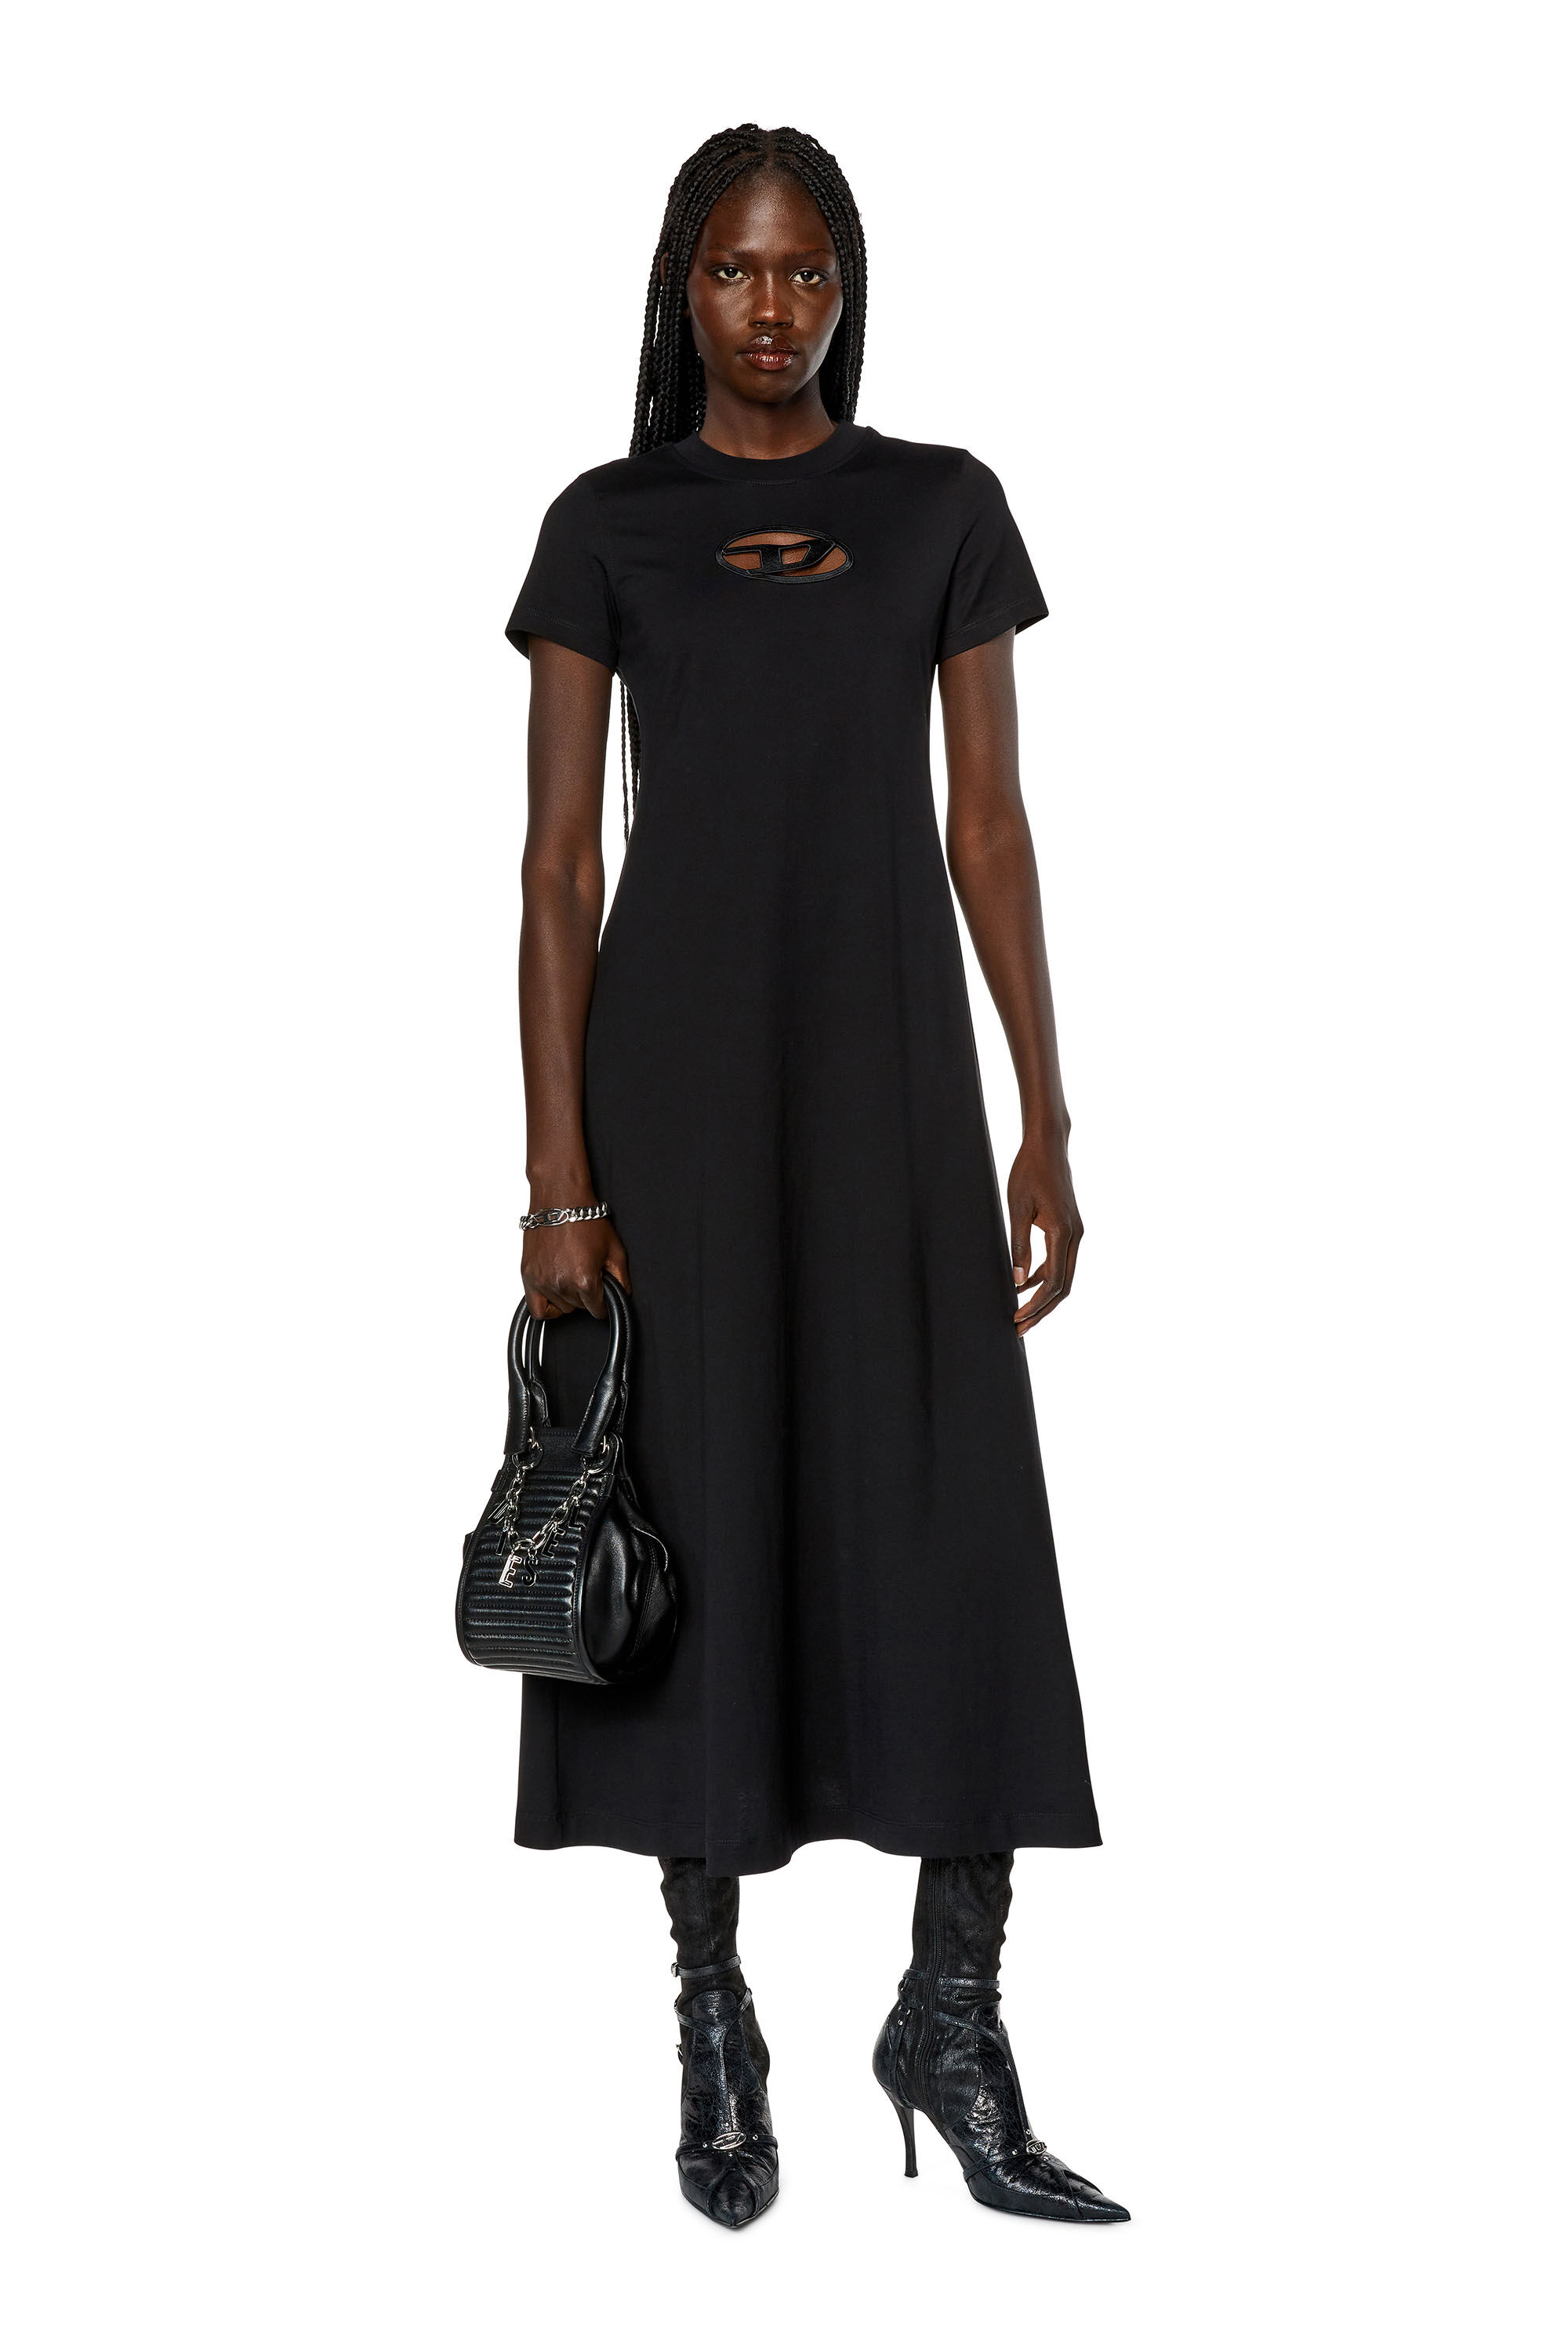 Women's T-shirt dress with embroidered D | Black | Diesel